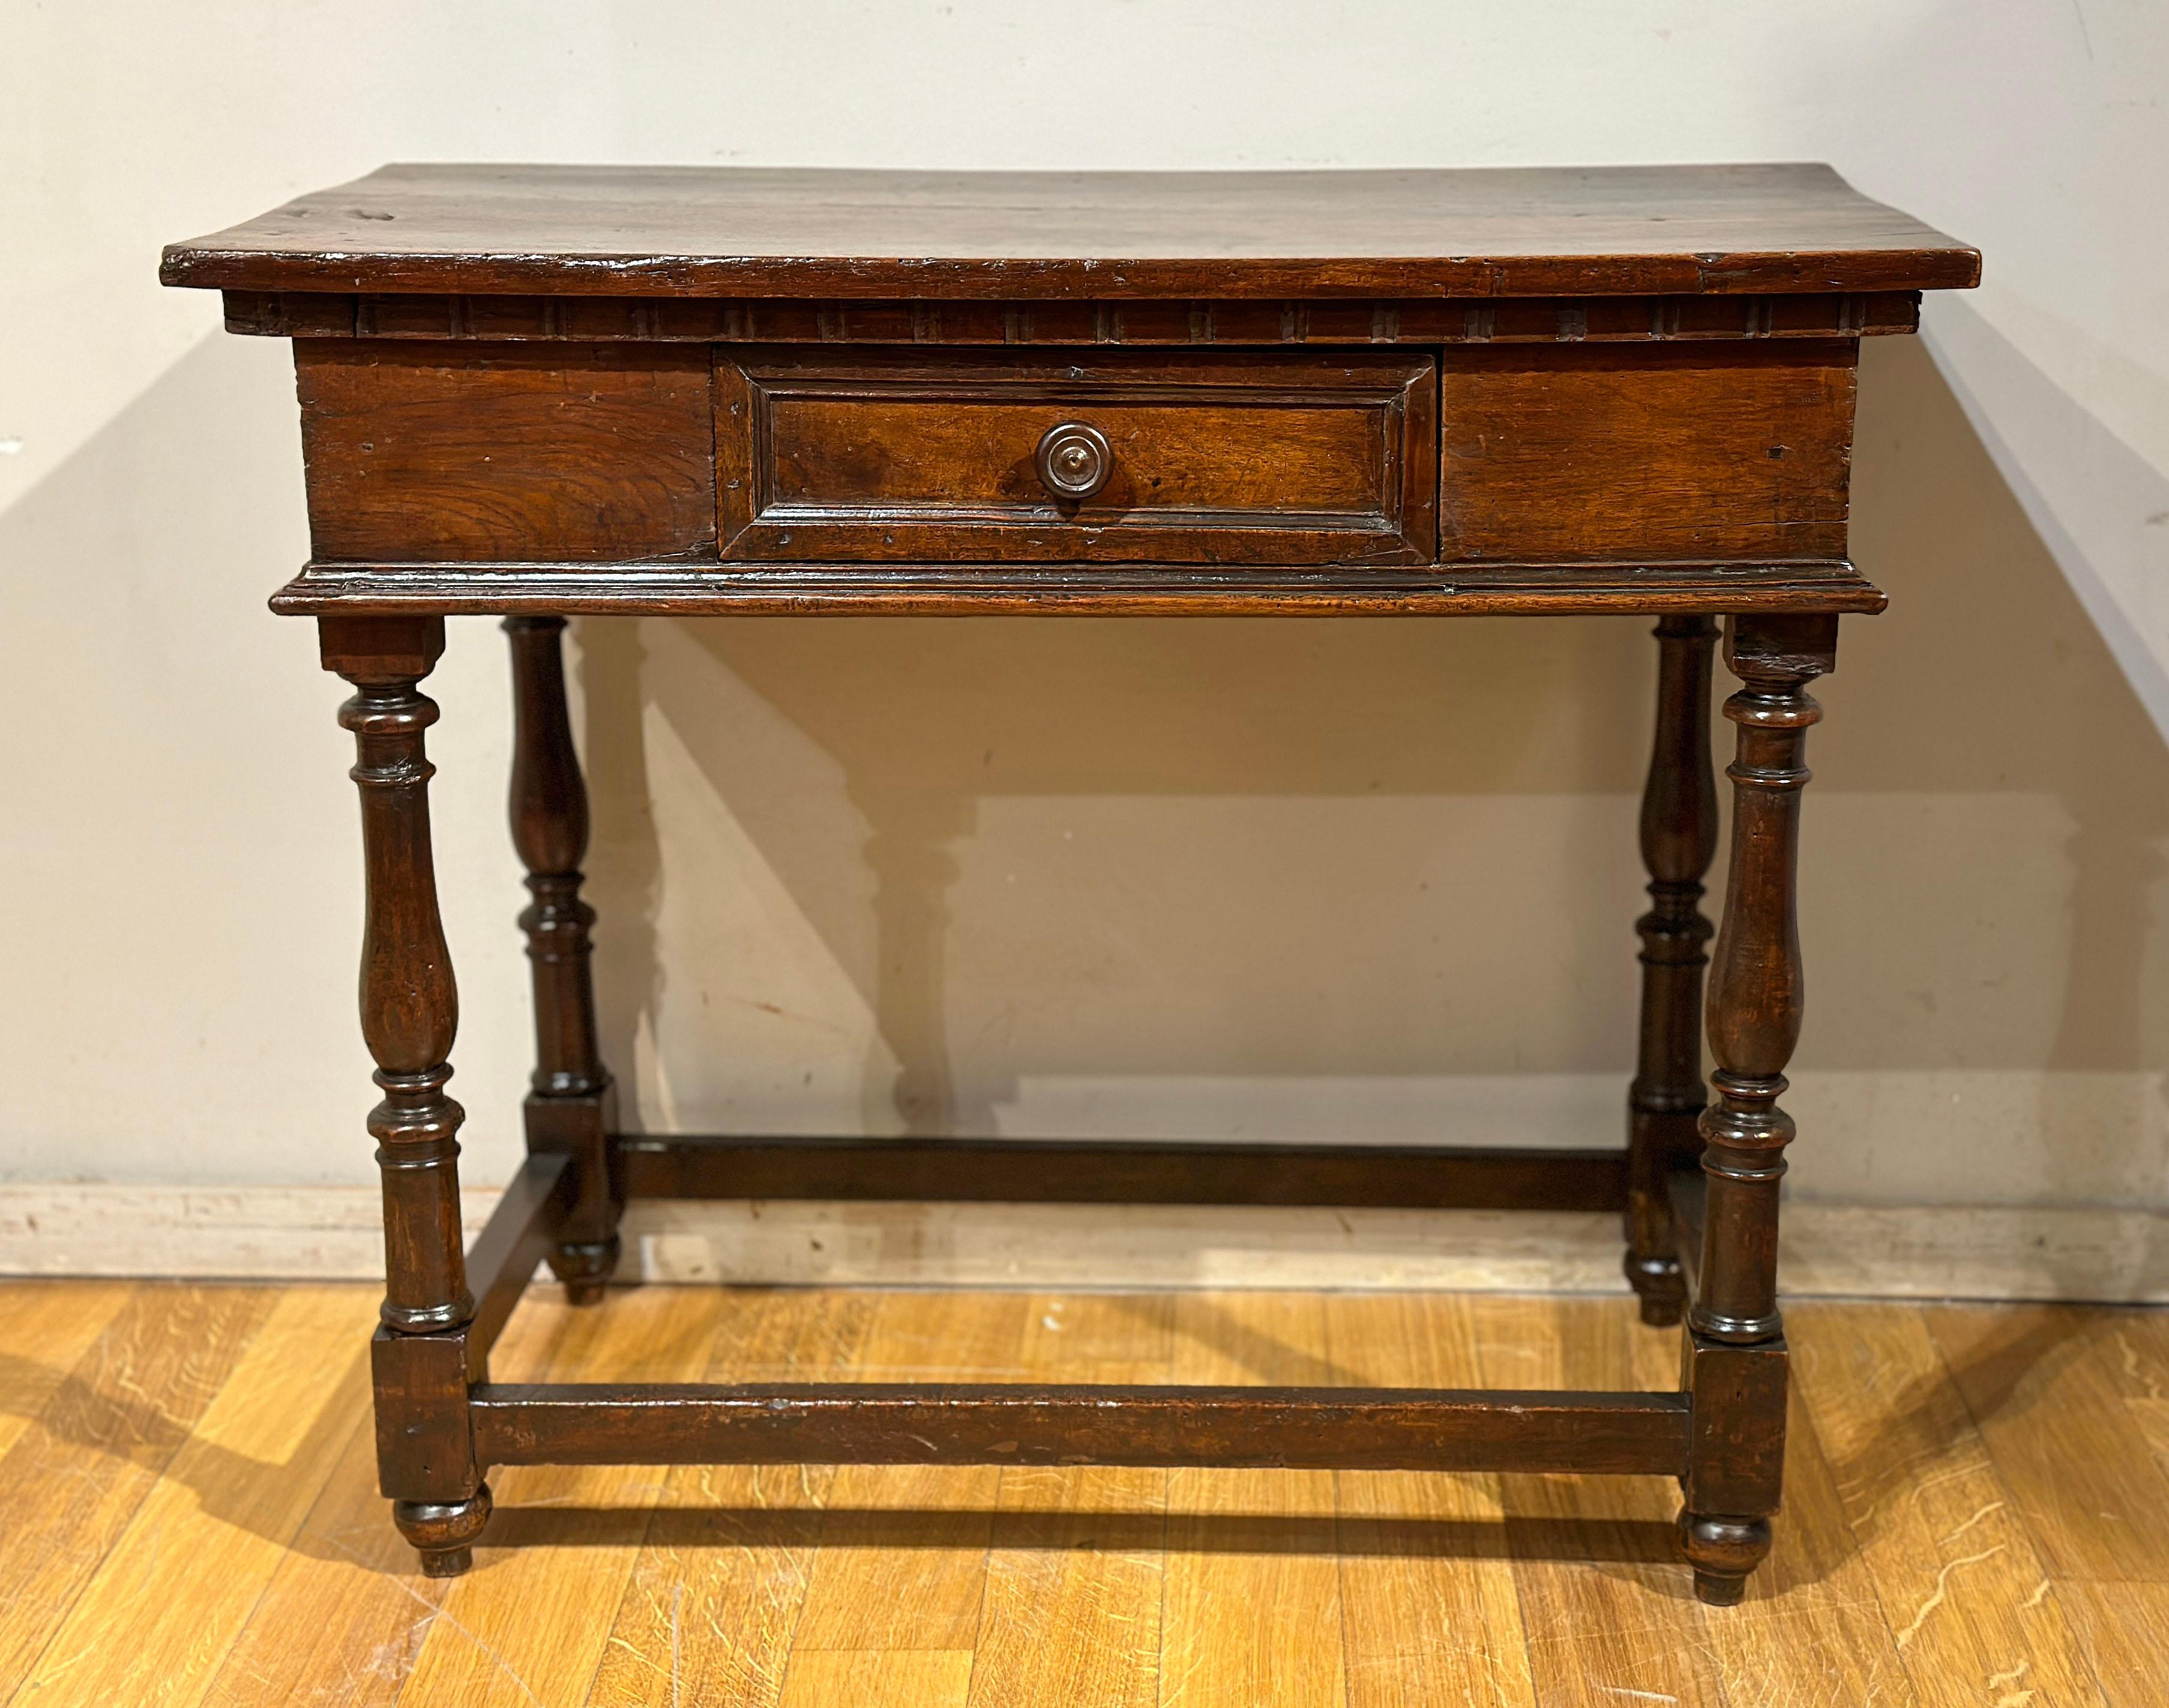 This solid walnut side table is an exemplary testimony of Italian manufacturing from the late 17th century and the Louis XIV period. The craftsmanship and simple but refined style typical of that era make it a unique piece to enrich any living